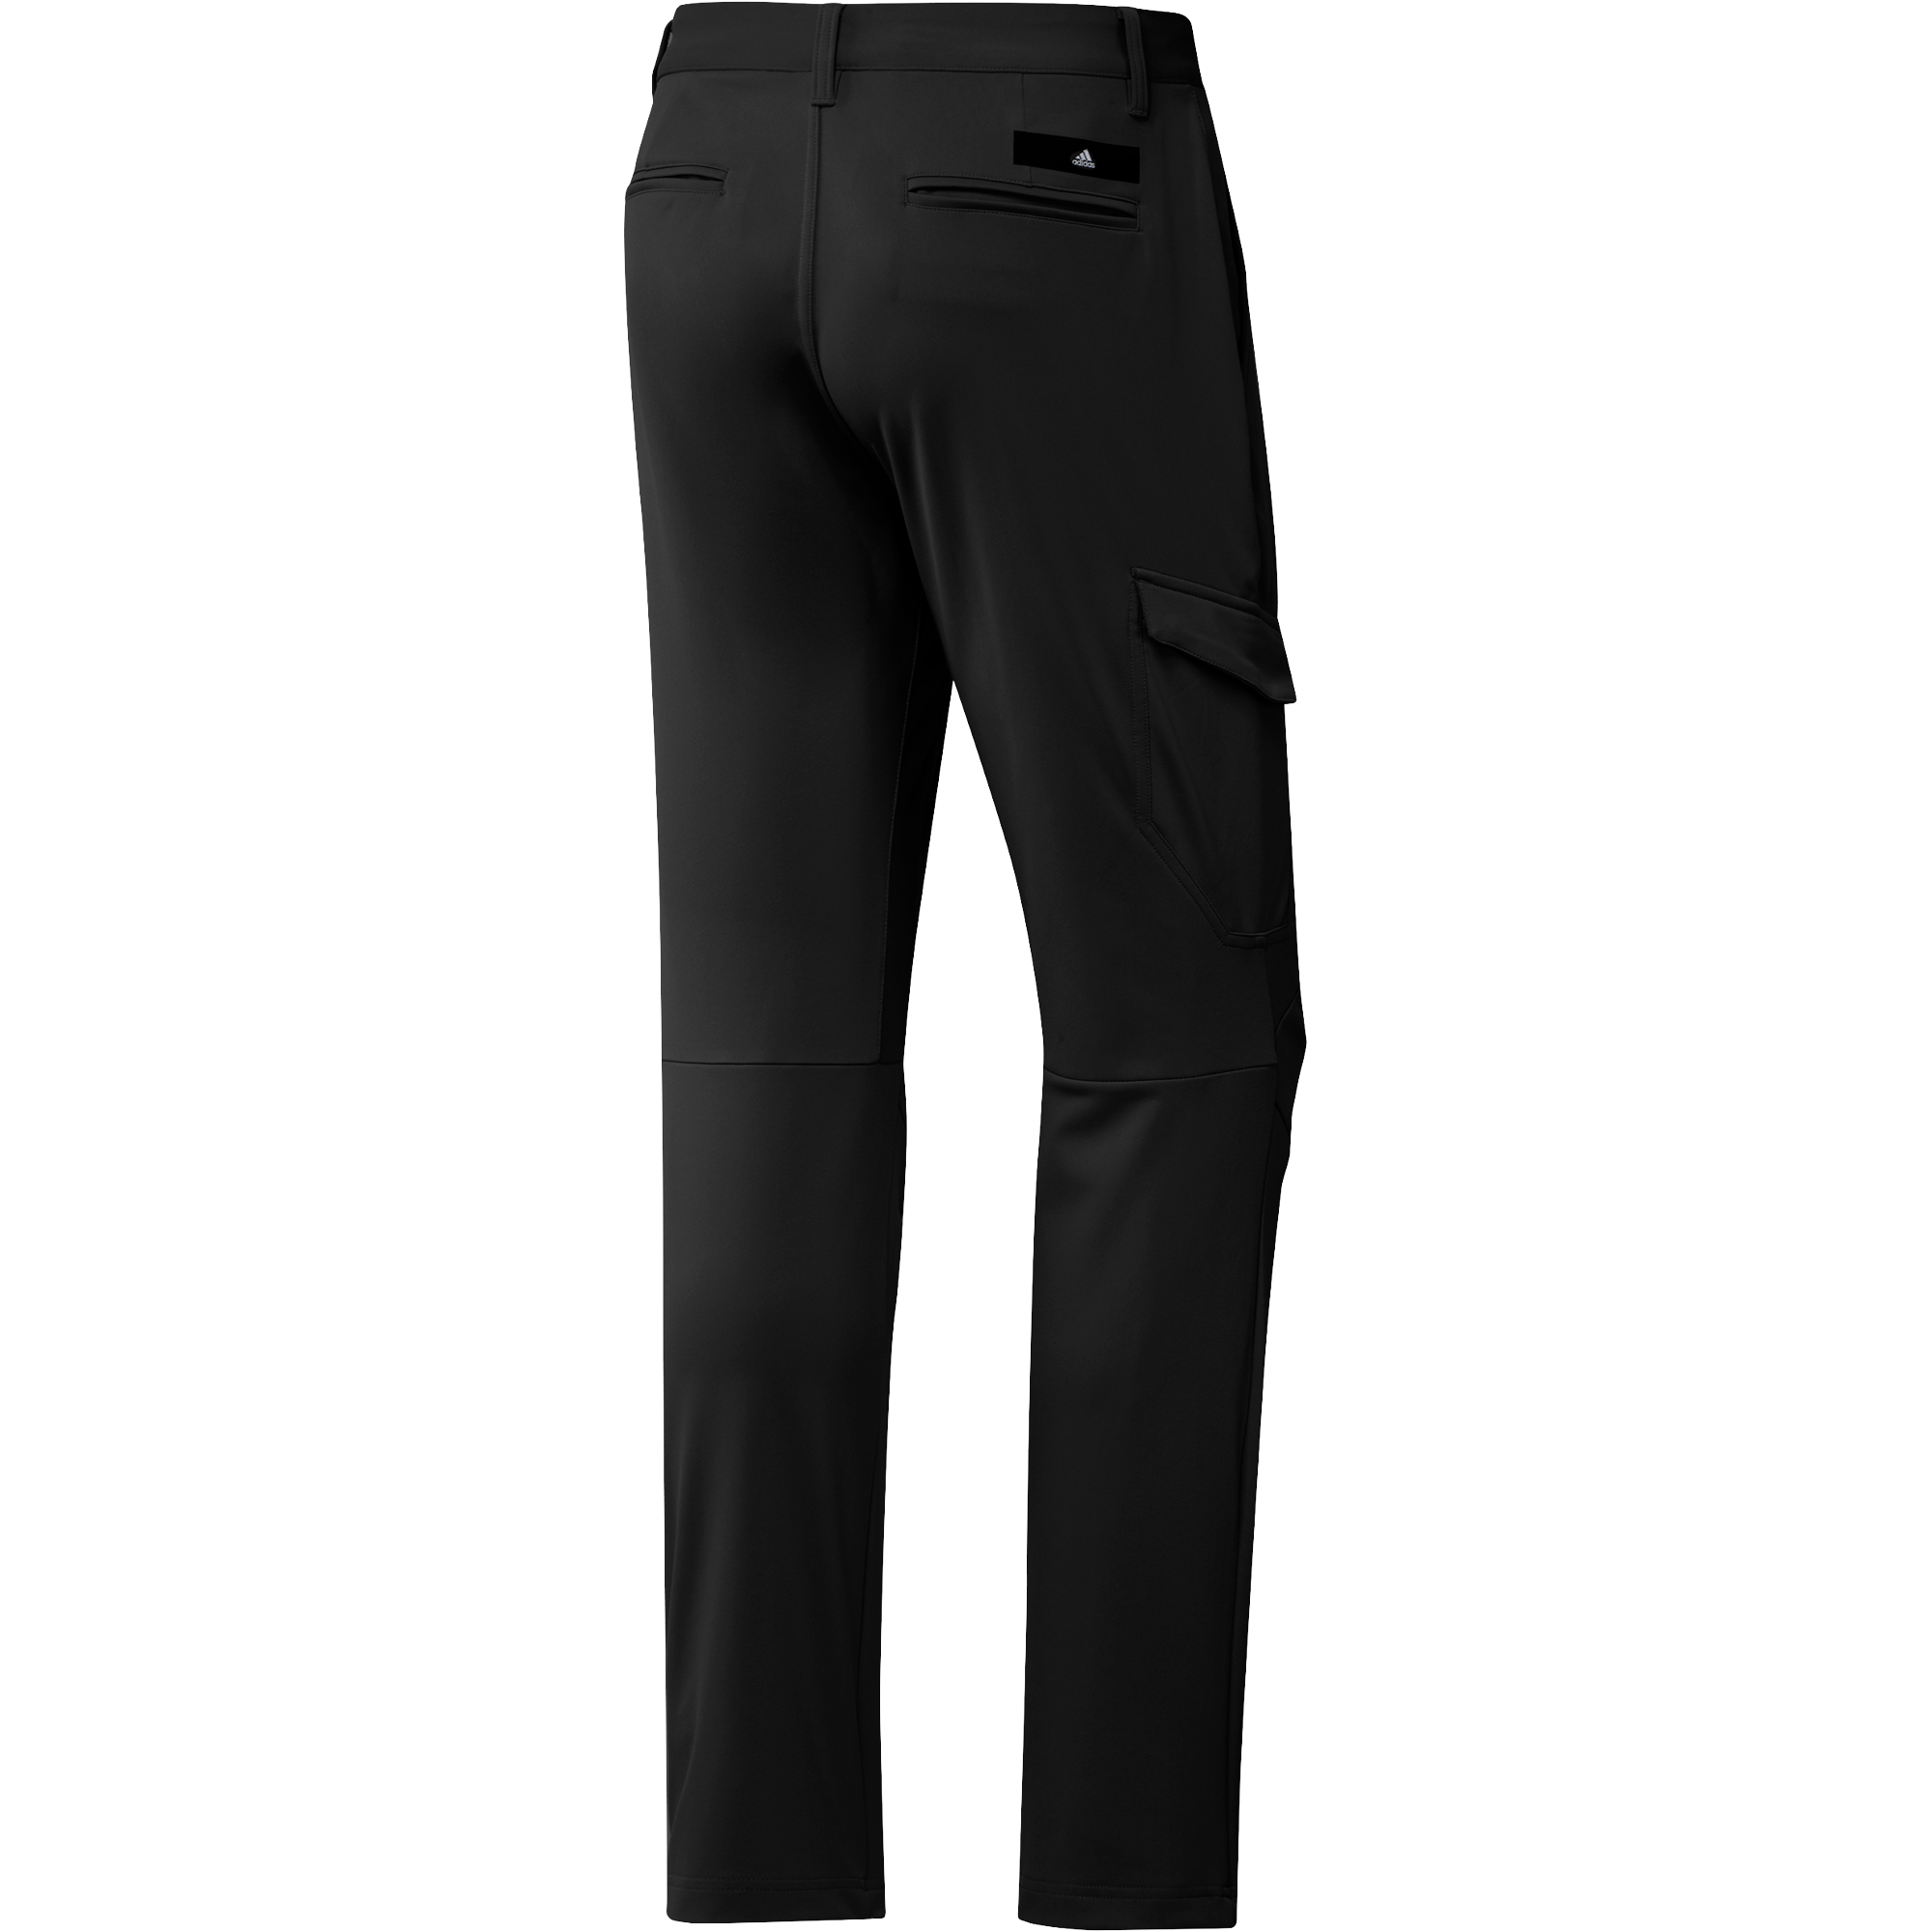 ADIDAS GOLF TROUSERS Ultimate 365 Tapered 3-Stripes Mens Pants / New 2022  Model £41.99 - PicClick UK